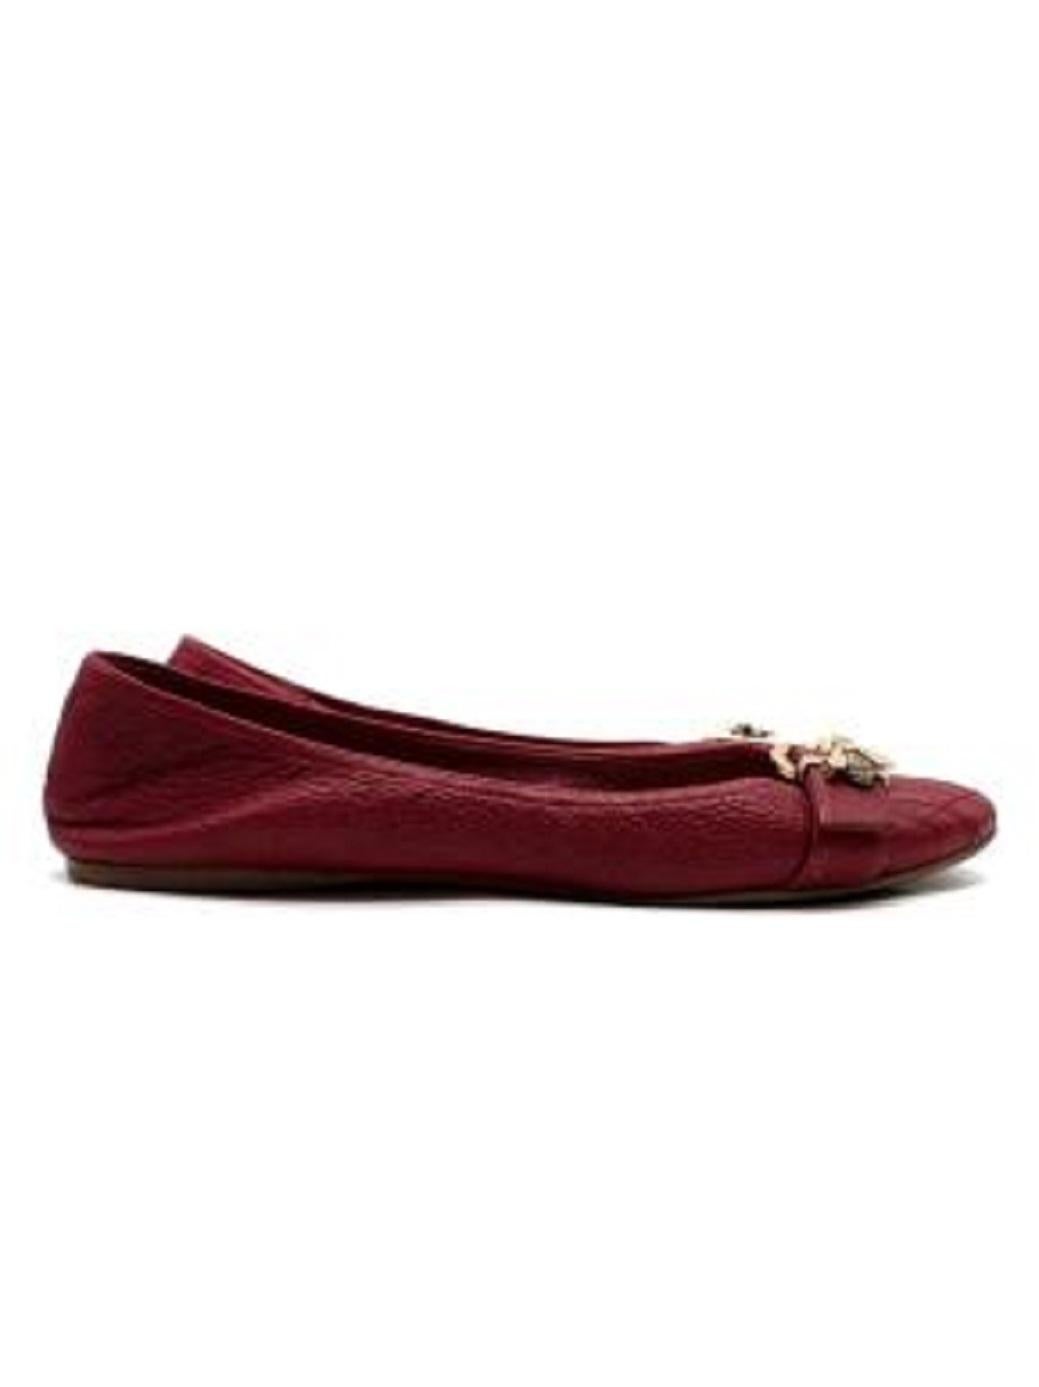 Dior Bee Embellished Red Leather Ballerinas In Good Condition For Sale In London, GB